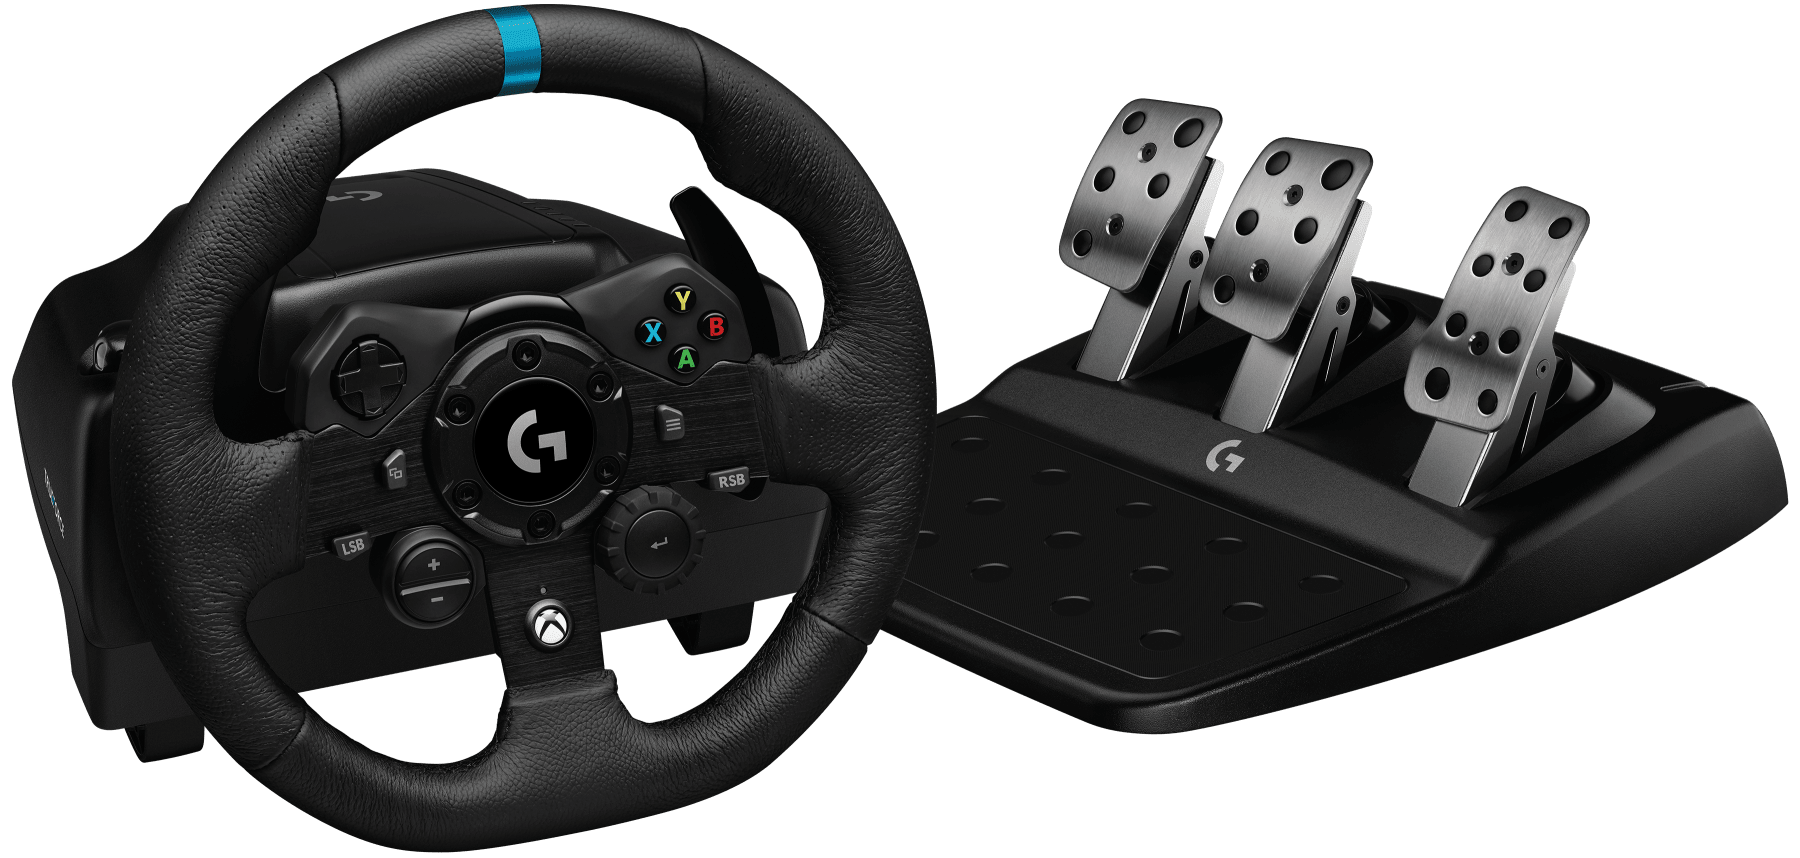 Thrustmaster T248 Racing Wheel Pedals Review, 60% OFF